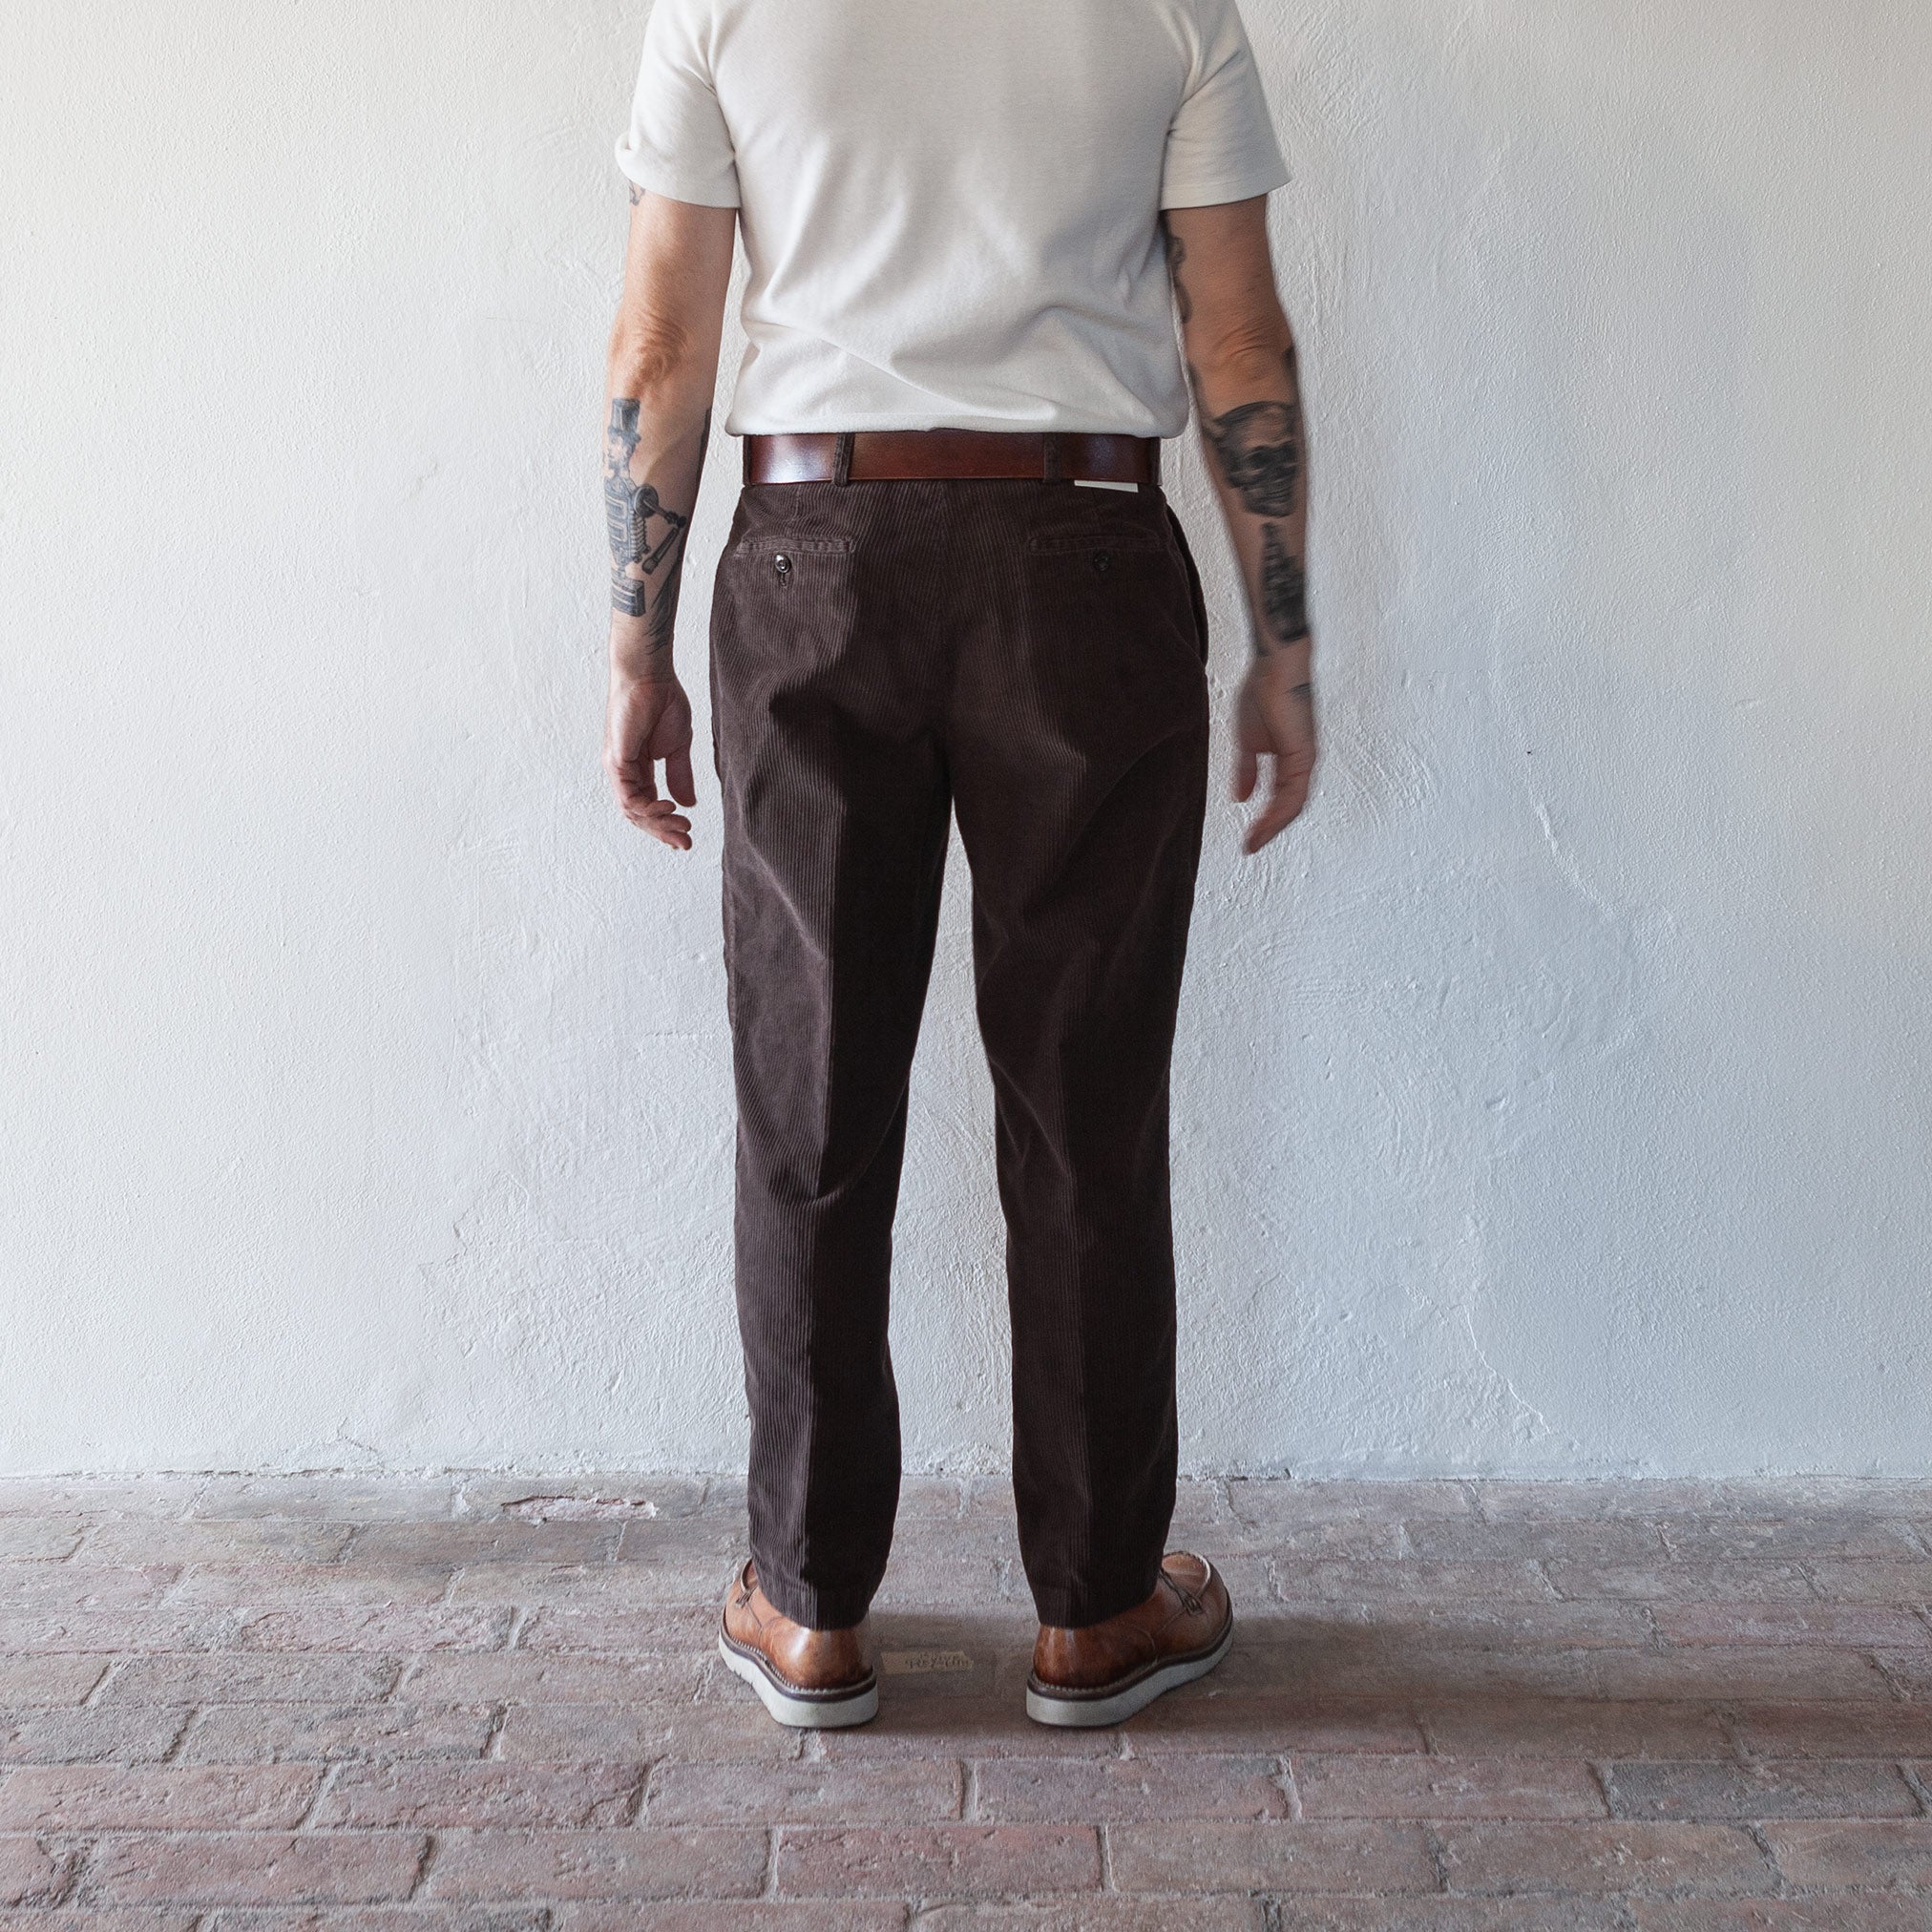 The Cardiff Pant in Dark Brown